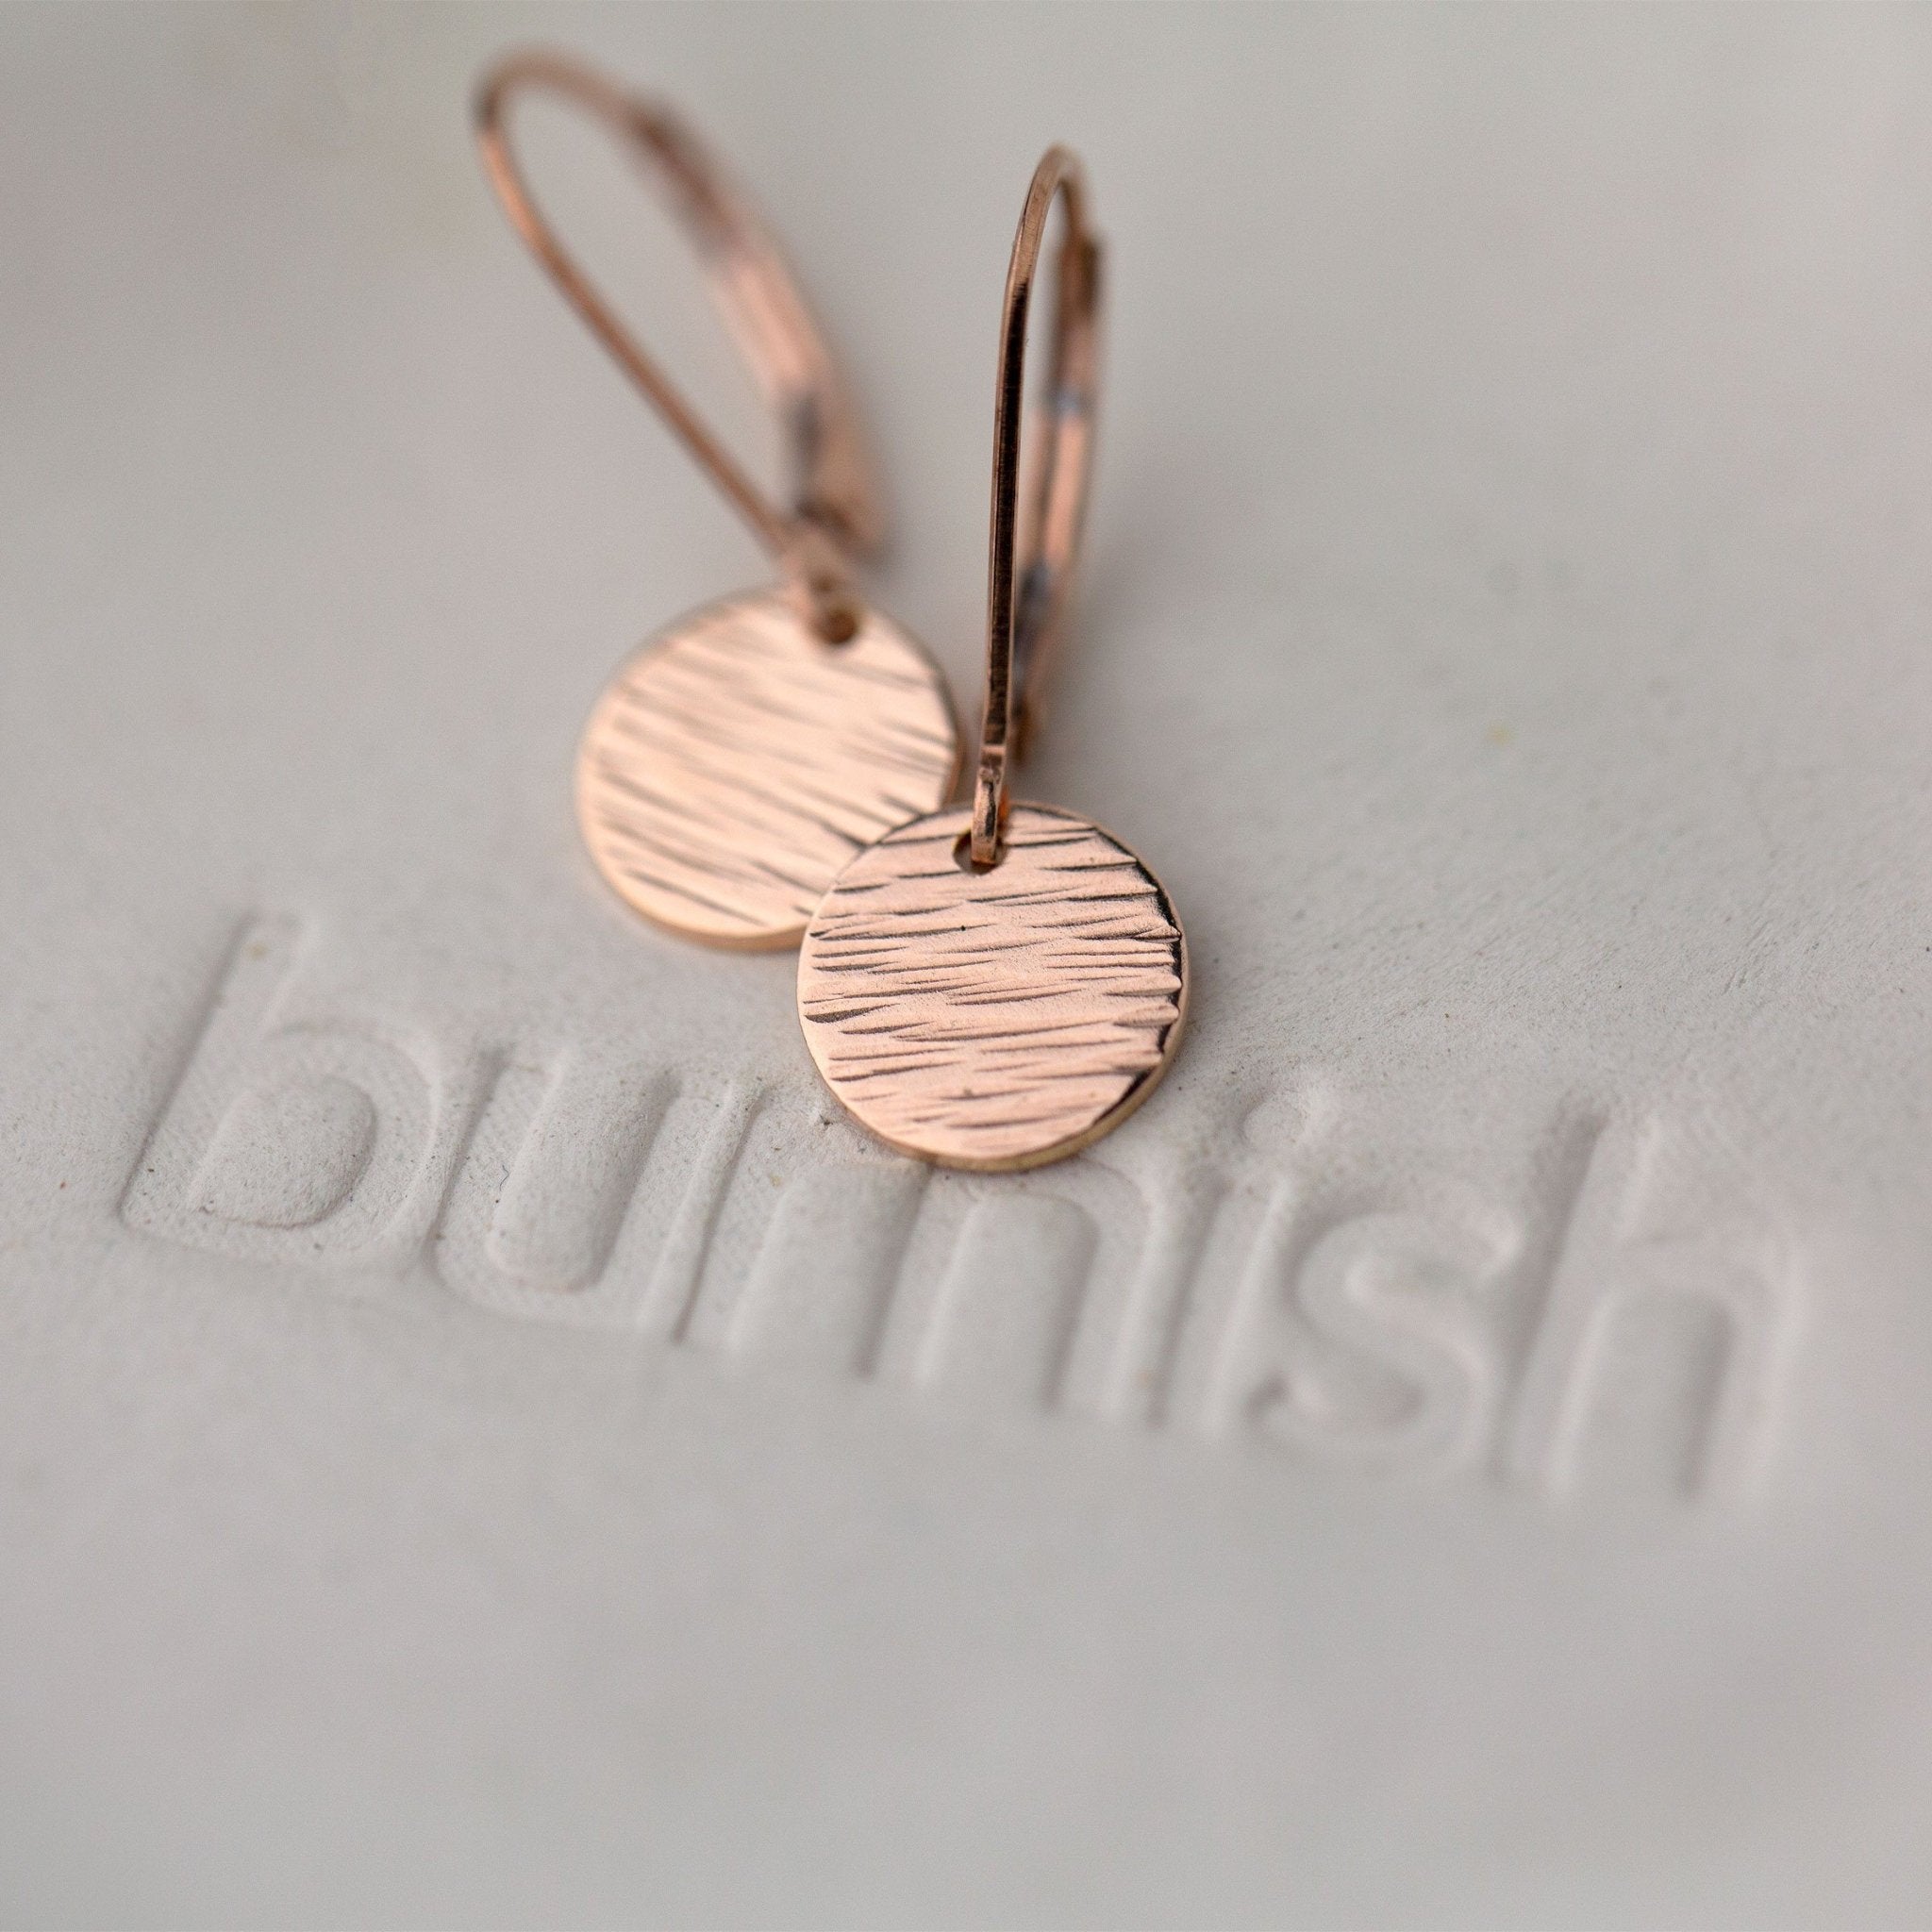 Rose Gold Textured Disc Lever-back Earrings - Handmade Jewelry by Burnish